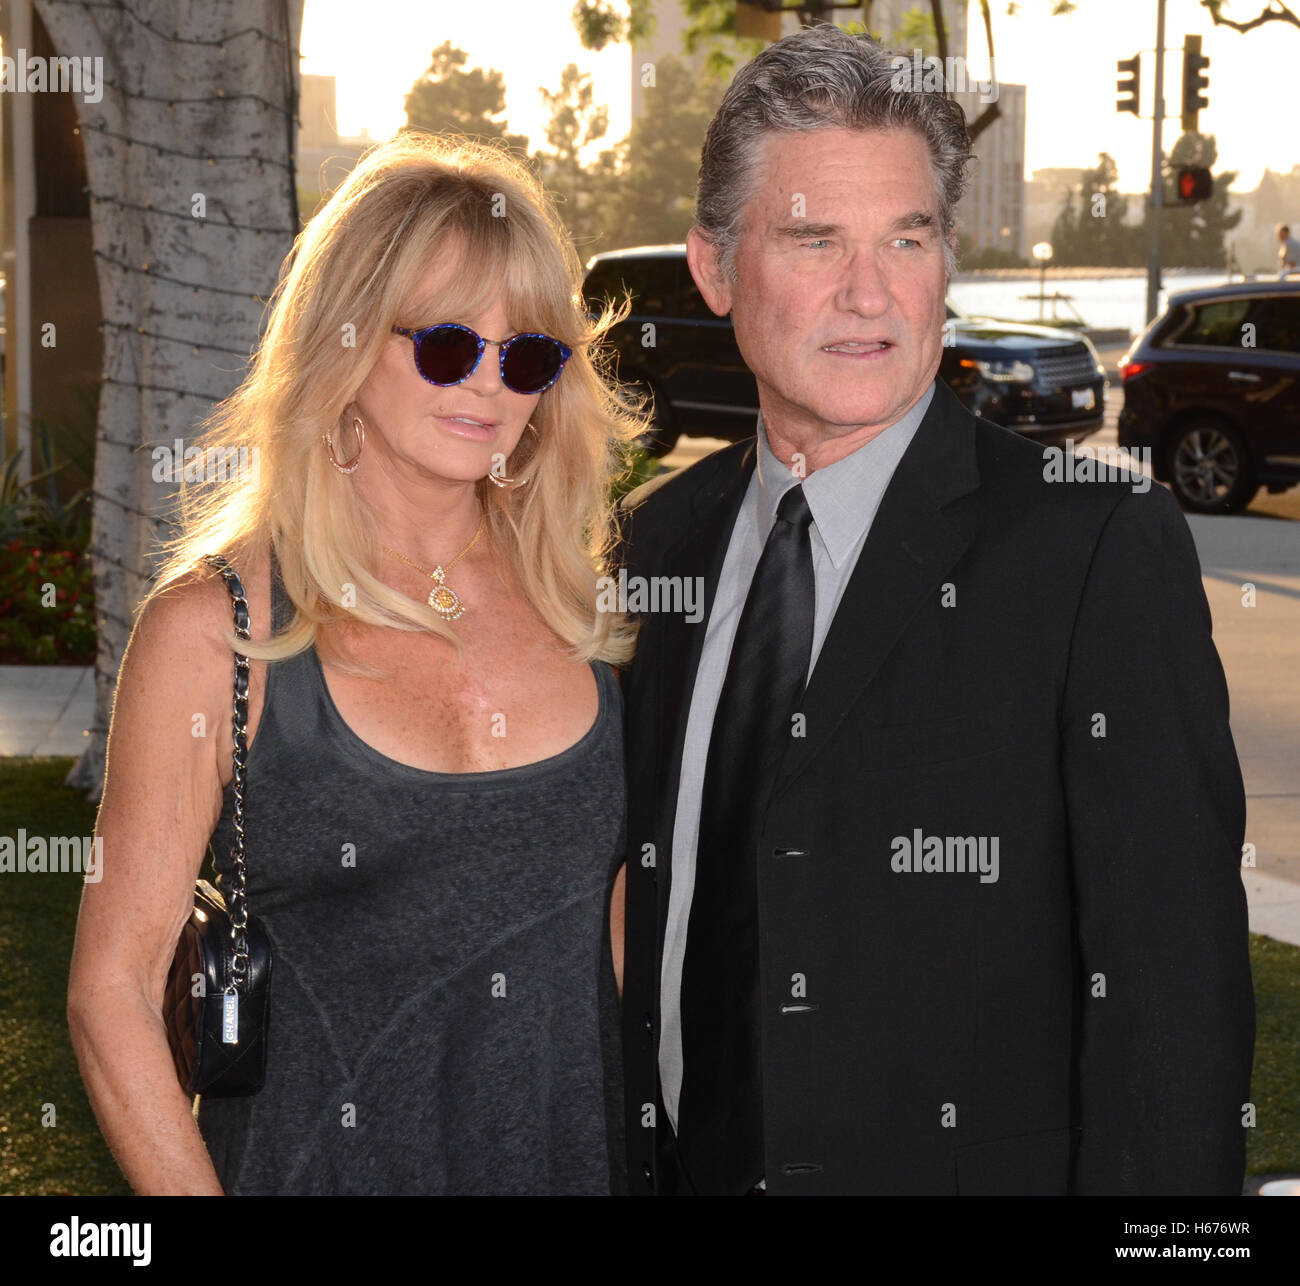 Goldie Hawn and Kurt Russell attends The Salk Institute Benefit Concert 'Remembering Pavarotti' featuring performances by Renée Fleming and Plácido Domingo at the Dorothy Chandler Pavilion on September 25th, 2015 in Los Angles CA. Stock Photo